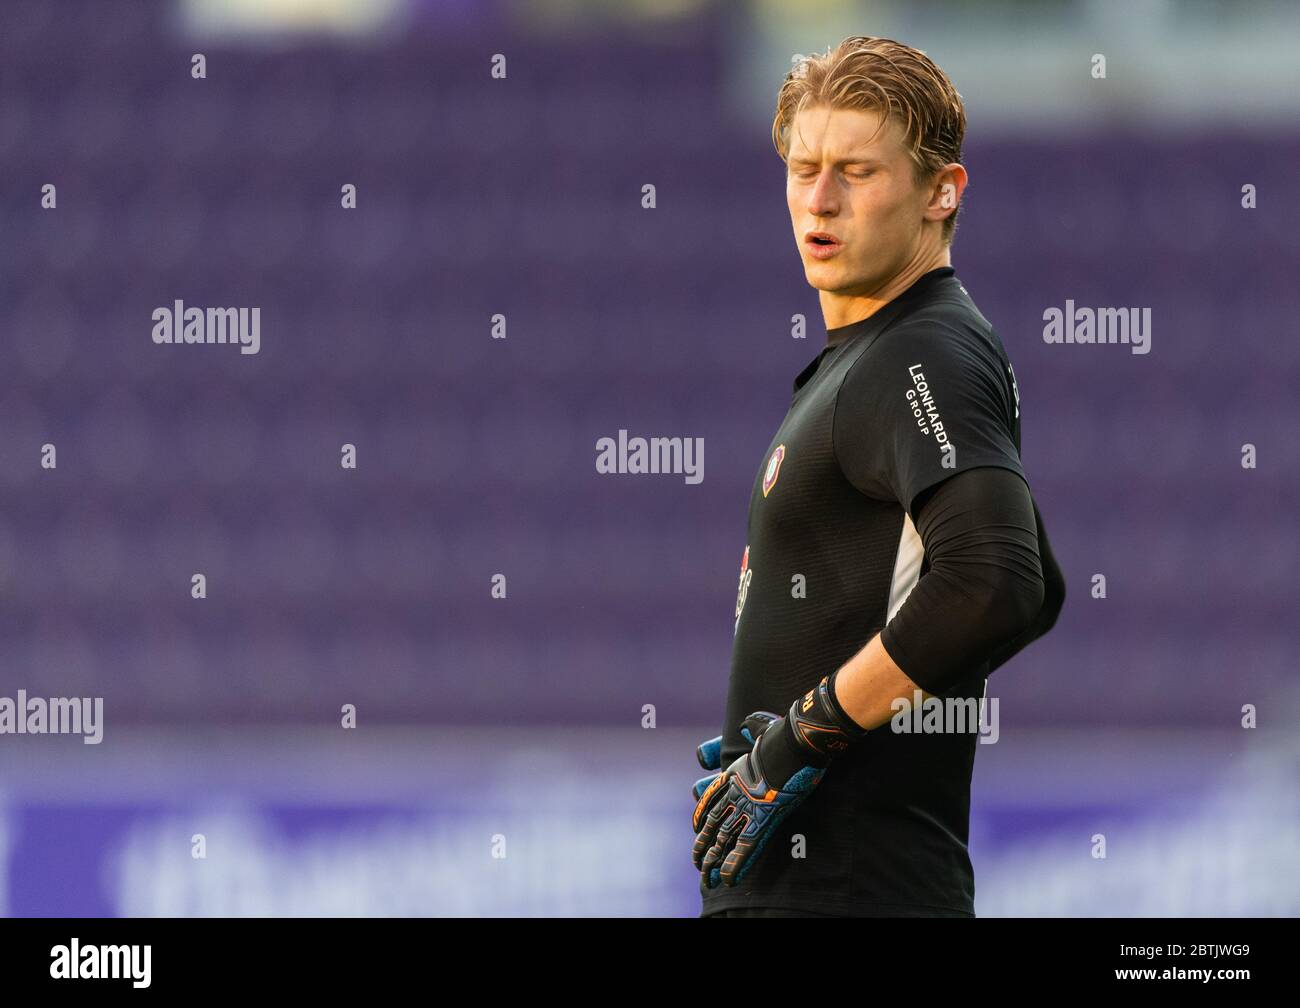 Aue, Germany. 26th May, 2020. Football: 2nd Bundesliga, FC Erzgebirge Aue - SV Darmstadt 98, 28th matchday, at the Sparkassen-Erzgebirgsstadion. Aue goalkeeper Robert Jendrusch. Credit: Robert Michael/dpa-Zentralbild - Pool/dpa - IMPORTANT NOTE: In accordance with the regulations of the DFL Deutsche Fußball Liga and the DFB Deutscher Fußball-Bund, it is prohibited to exploit or have exploited in the stadium and/or from the game taken photographs in the form of sequence images and/or video-like photo series./dpa/Alamy Live News Stock Photo